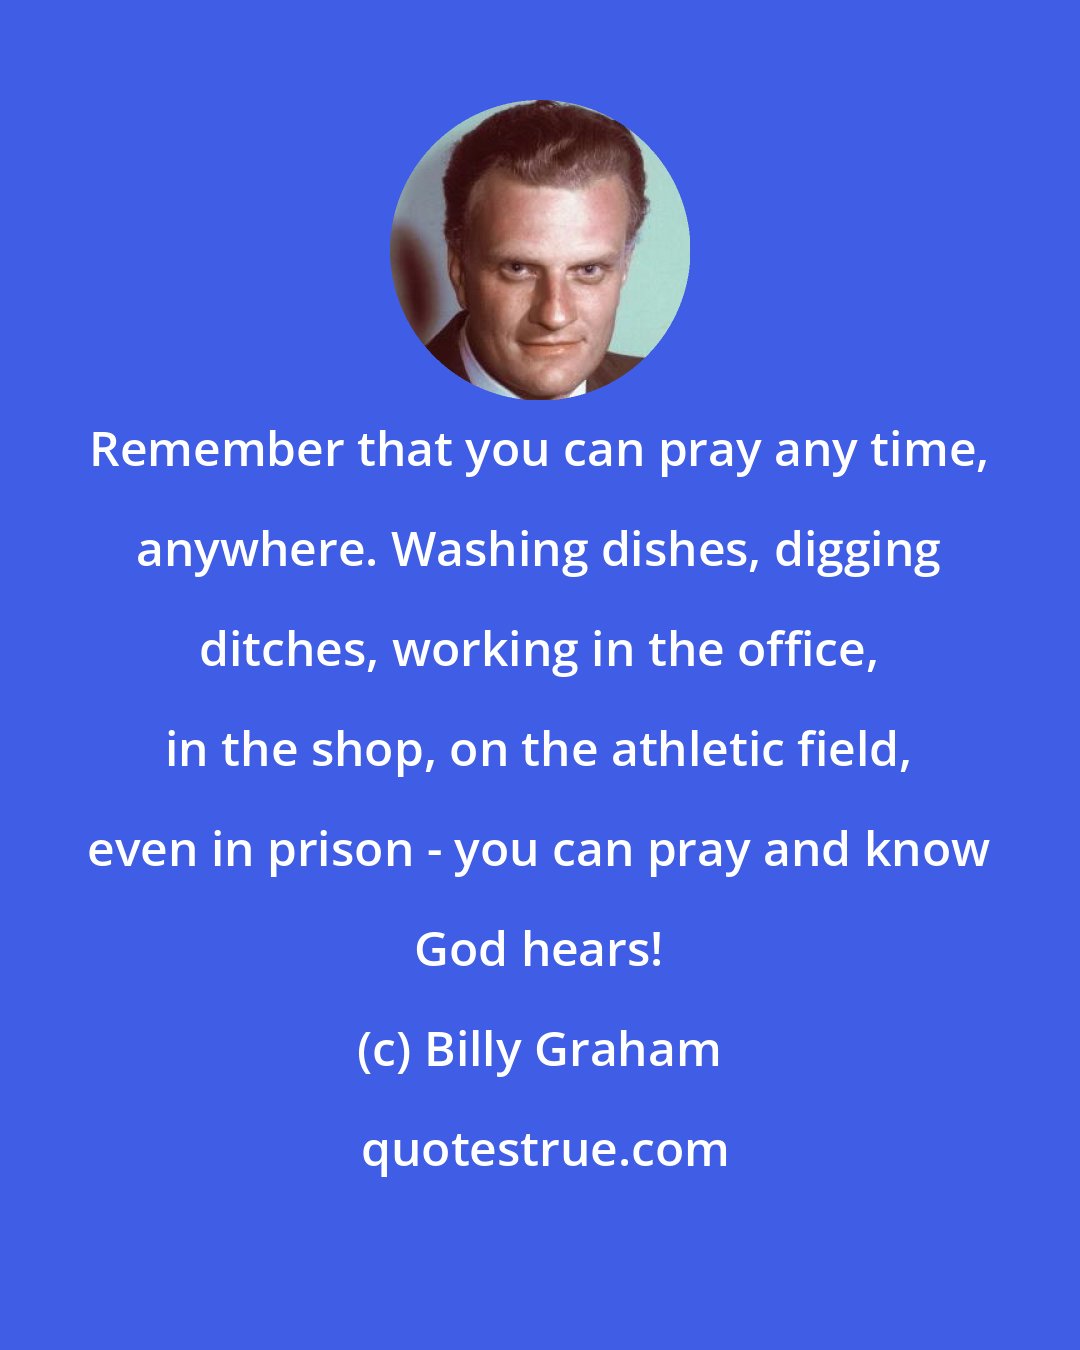 Billy Graham: Remember that you can pray any time, anywhere. Washing dishes, digging ditches, working in the office, in the shop, on the athletic field, even in prison - you can pray and know God hears!